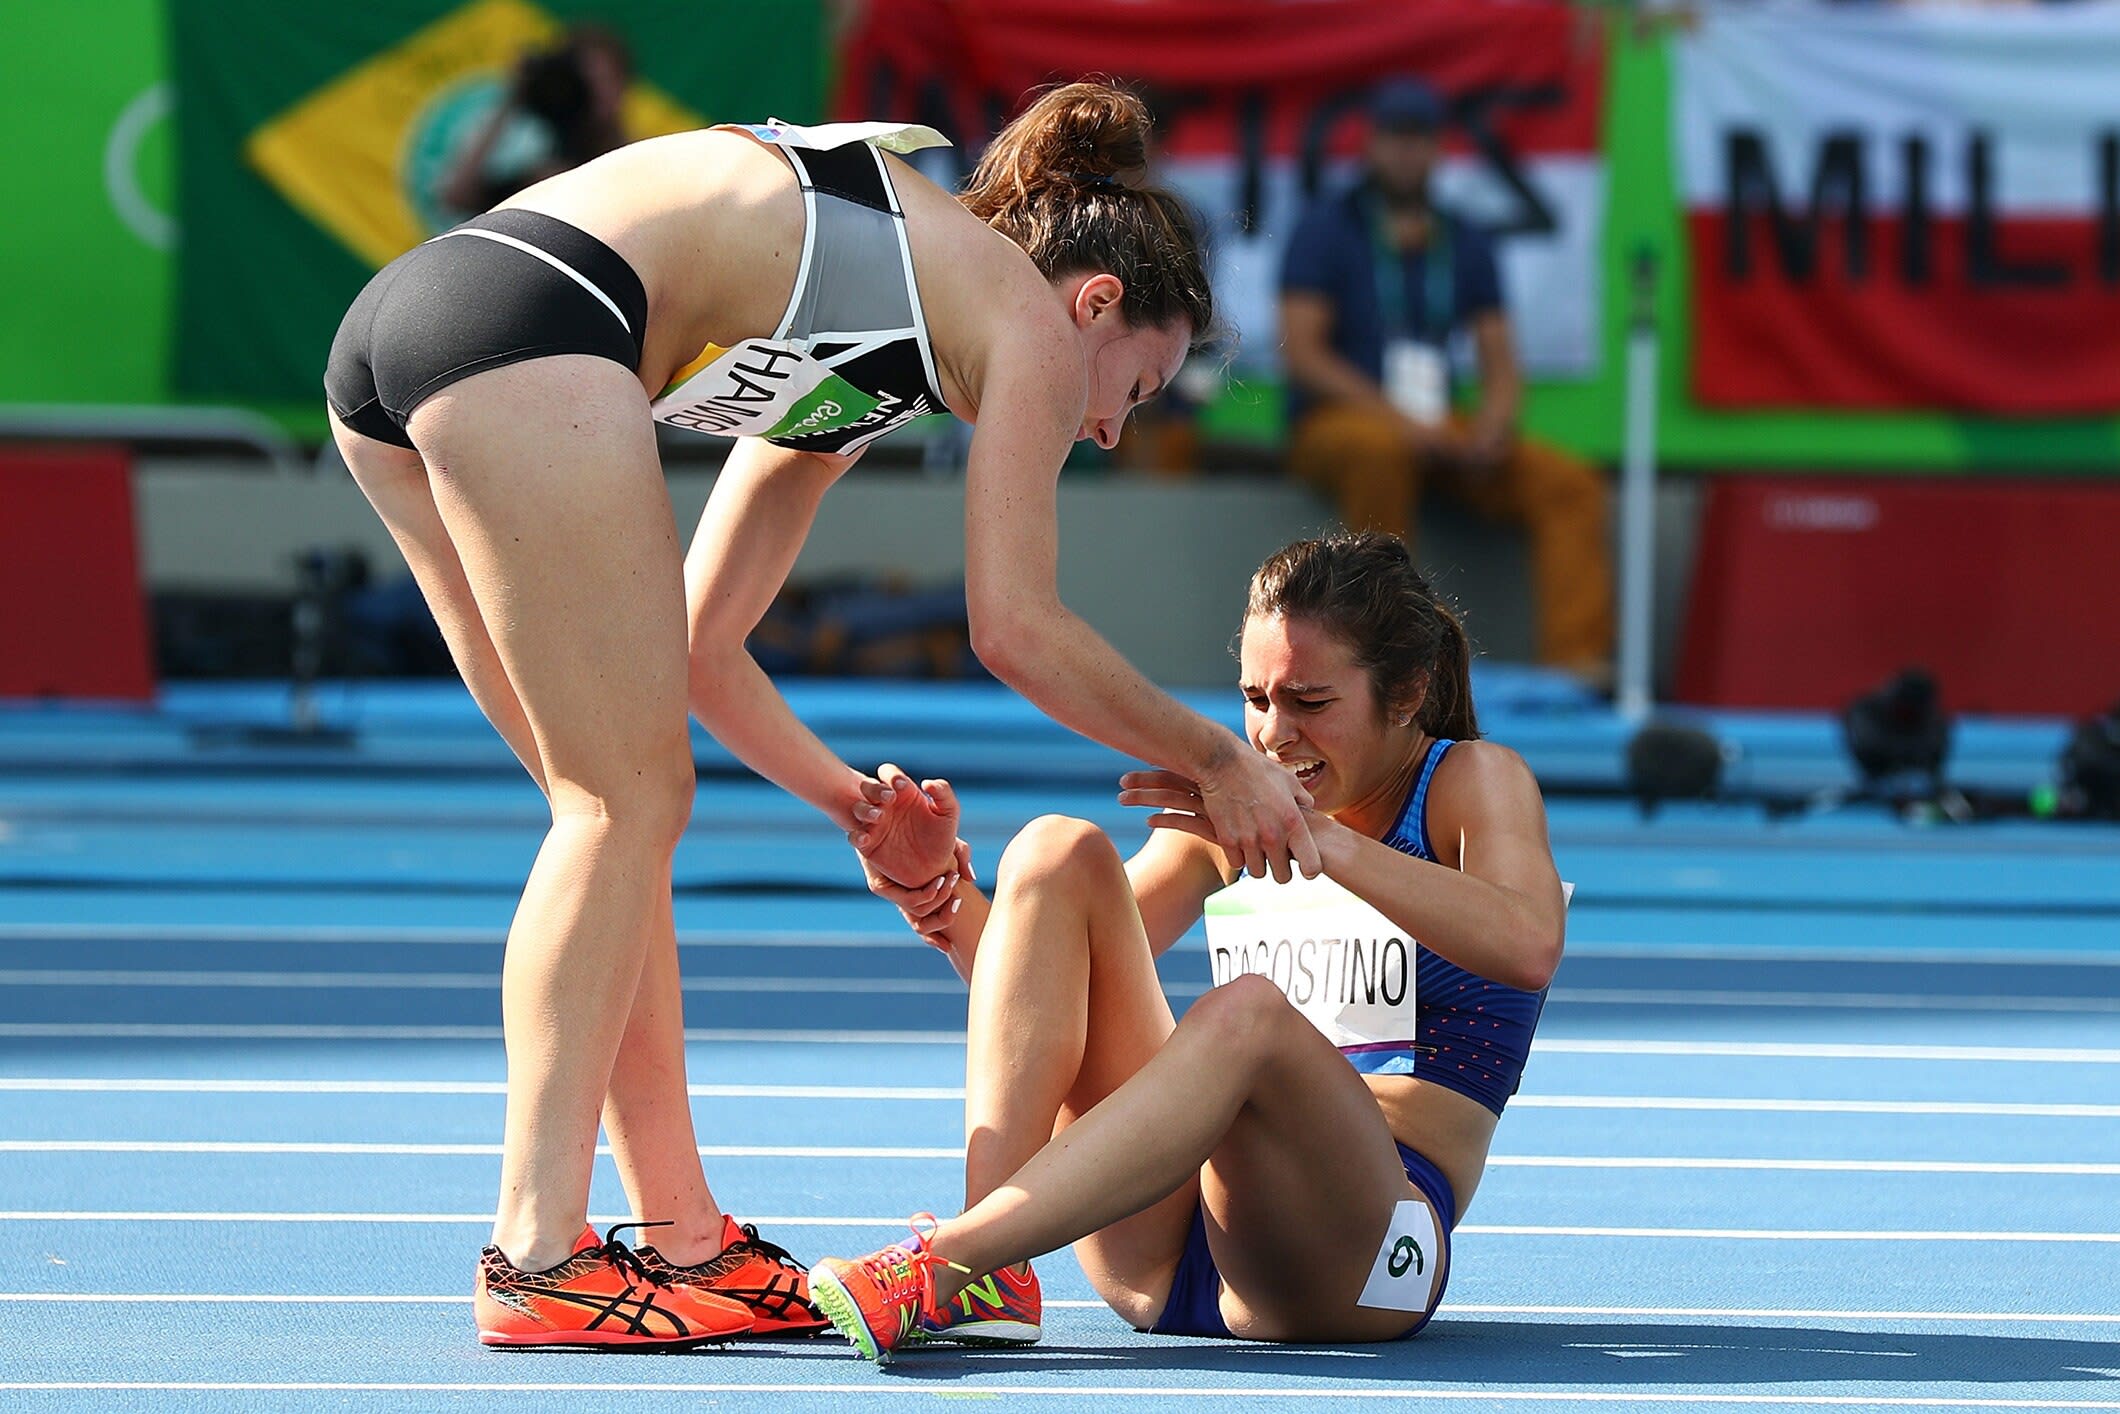 Tokyo Olympics: U.S. Runner Helps Competitor to Finish Line After Fall